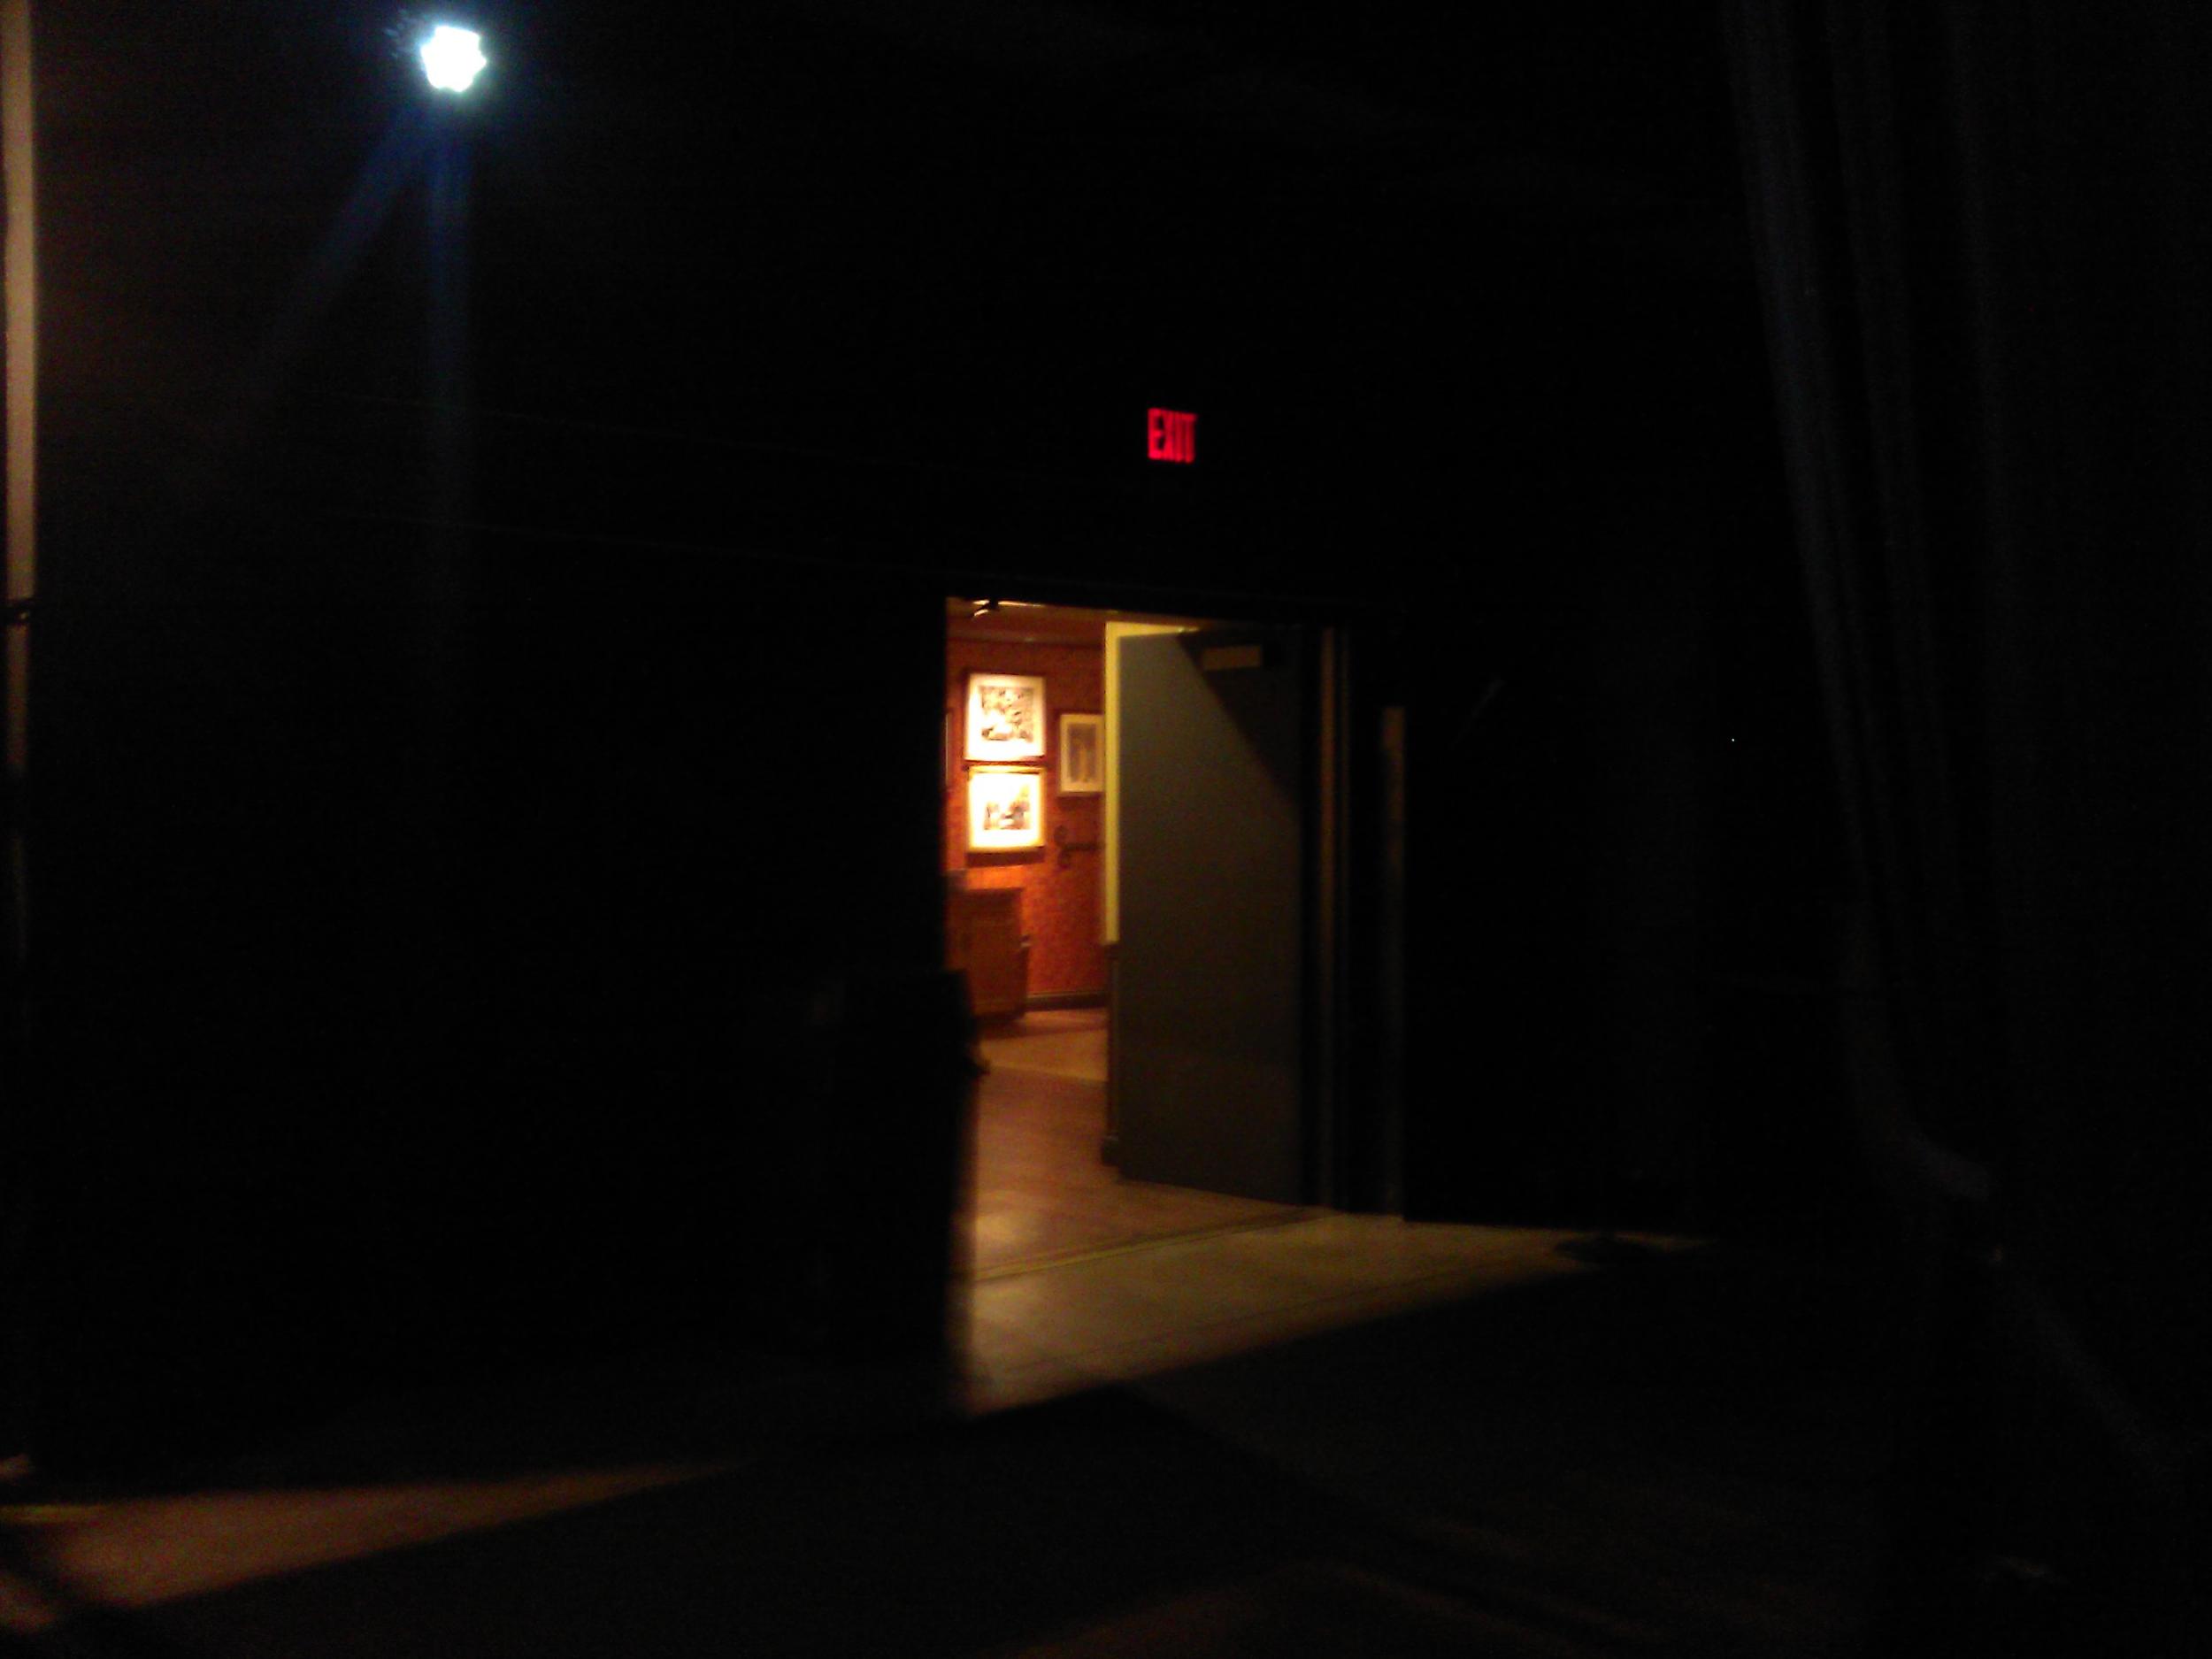 The view back into the dressing room as an artist waits behind the curtain to be announced.